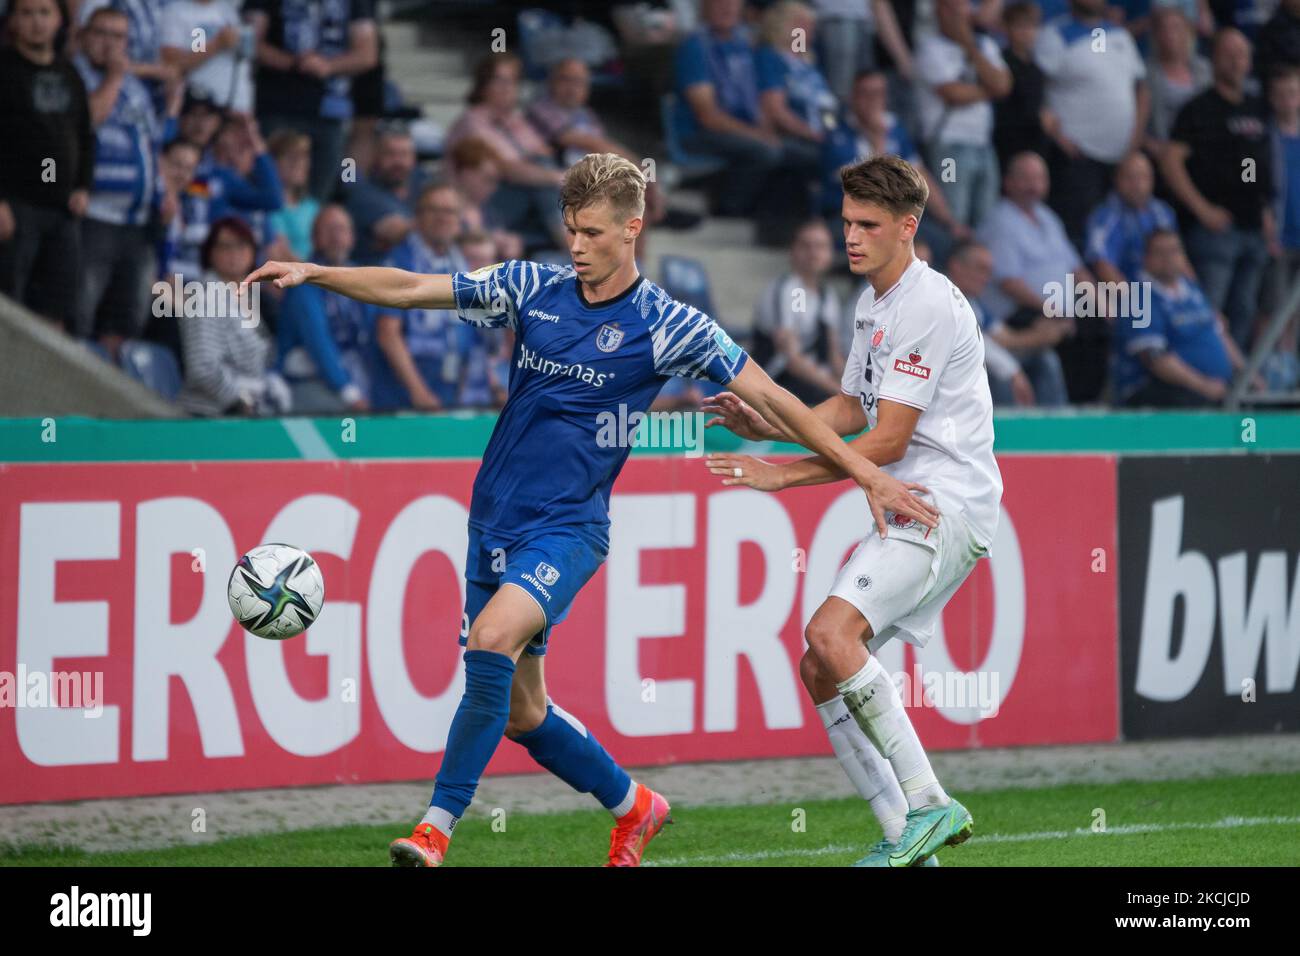 Luca Schuler (left) of 1. FC Magdeburg and Luca Zander (right) of FC St. Pauli vie for the ball during the DFB CUP first round match match between 1. FC Magdeburg and FC St. Pauli at MDCC-Arena on August 07, 2021 in Magdeburg, Germany. (Photo by Peter Niedung/NurPhoto) Stock Photo